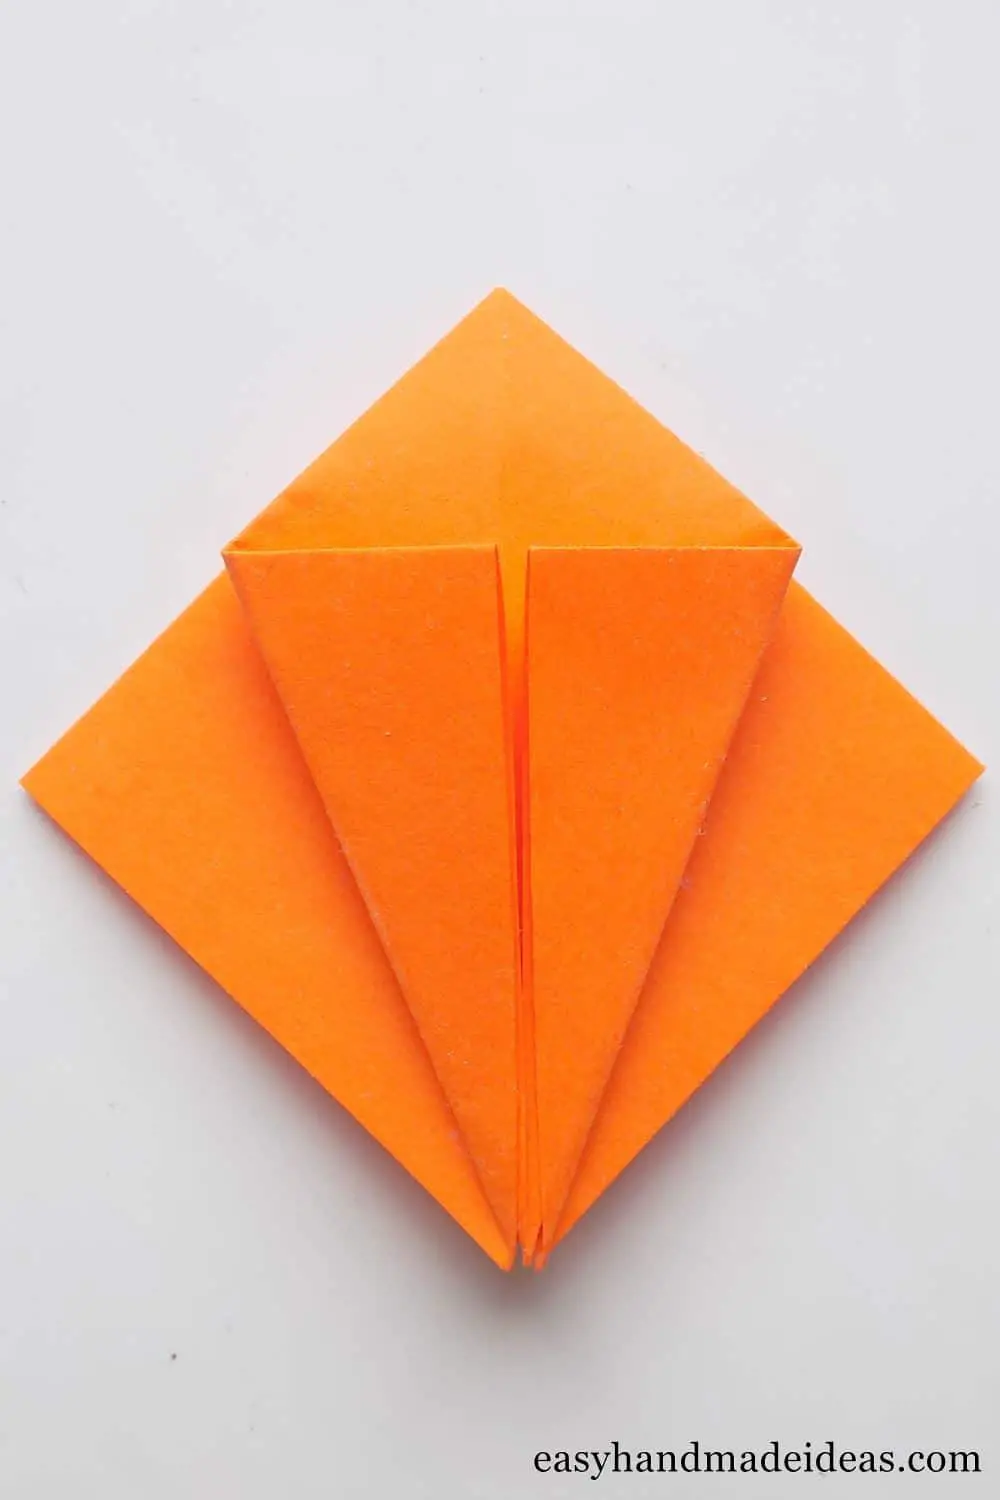 Square with the corners folded inwards